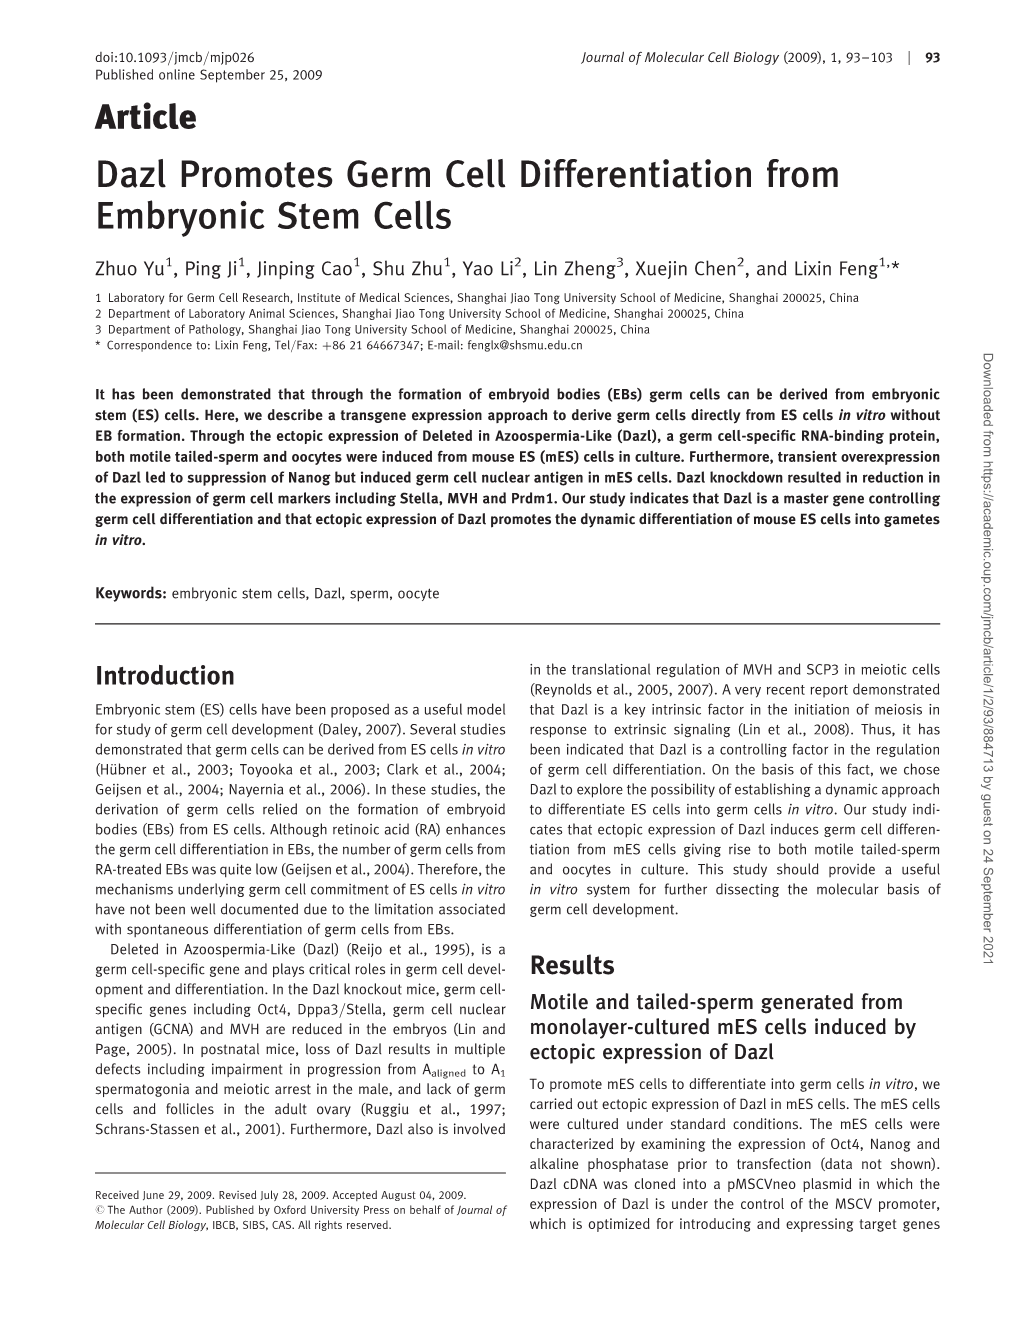 Dazl Promotes Germ Cell Differentiation from Embryonic Stem Cells